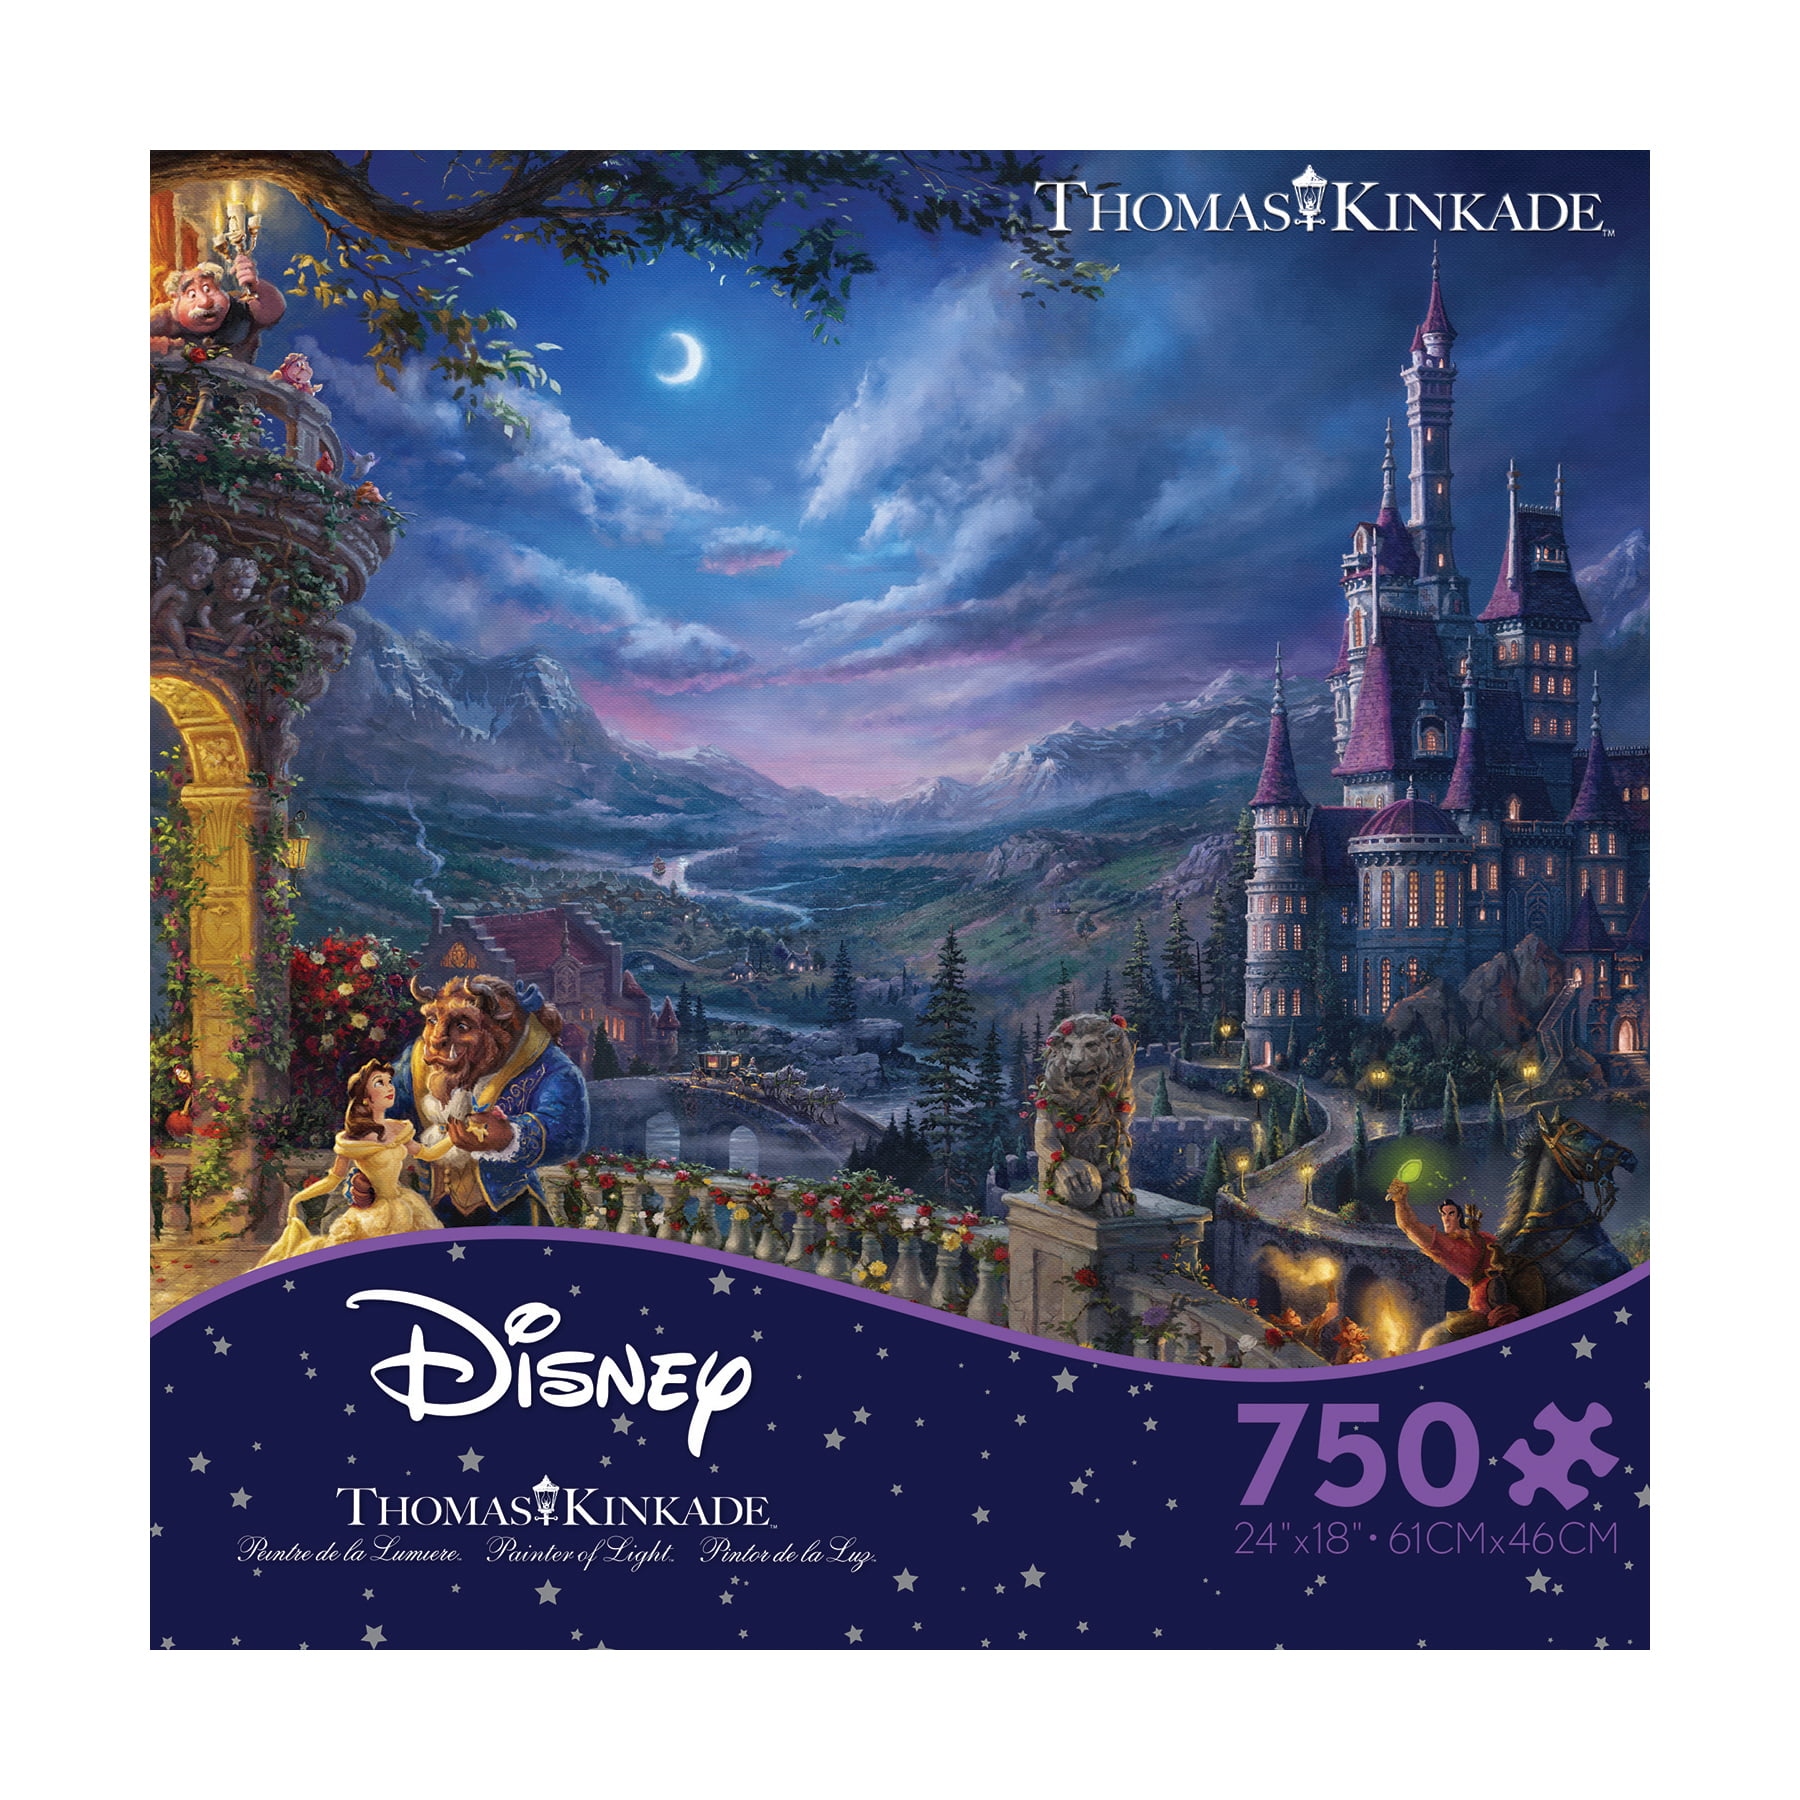 Tenyo Jigsaw Puzzle Beauty and The Beast Belle 1000 Pcs Thomas Kinkade 51x73.5cm for sale online 